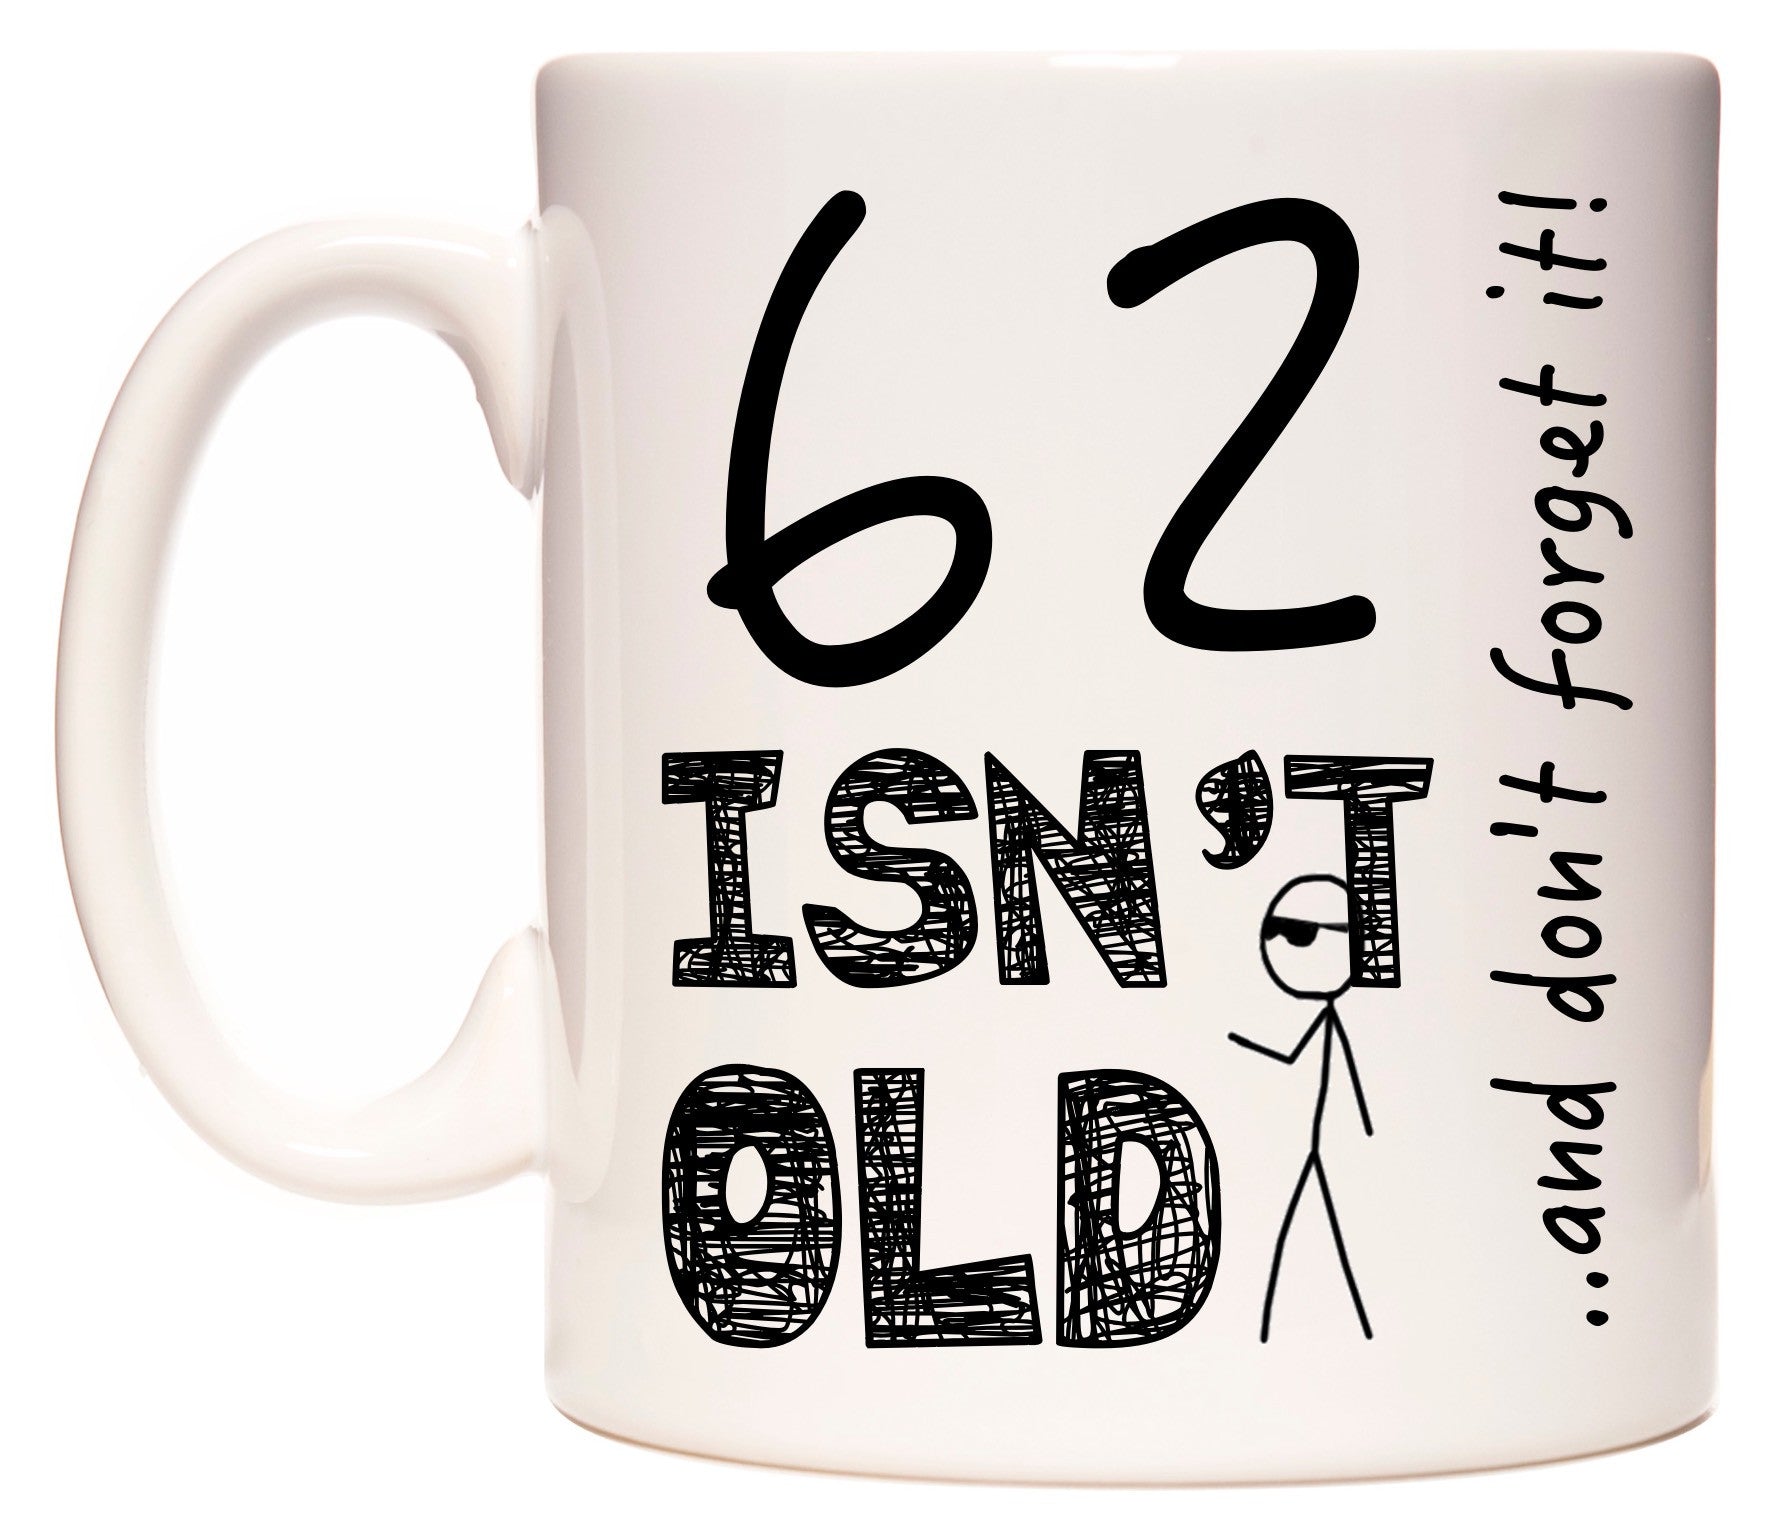 This mug features 62 Isn't Old